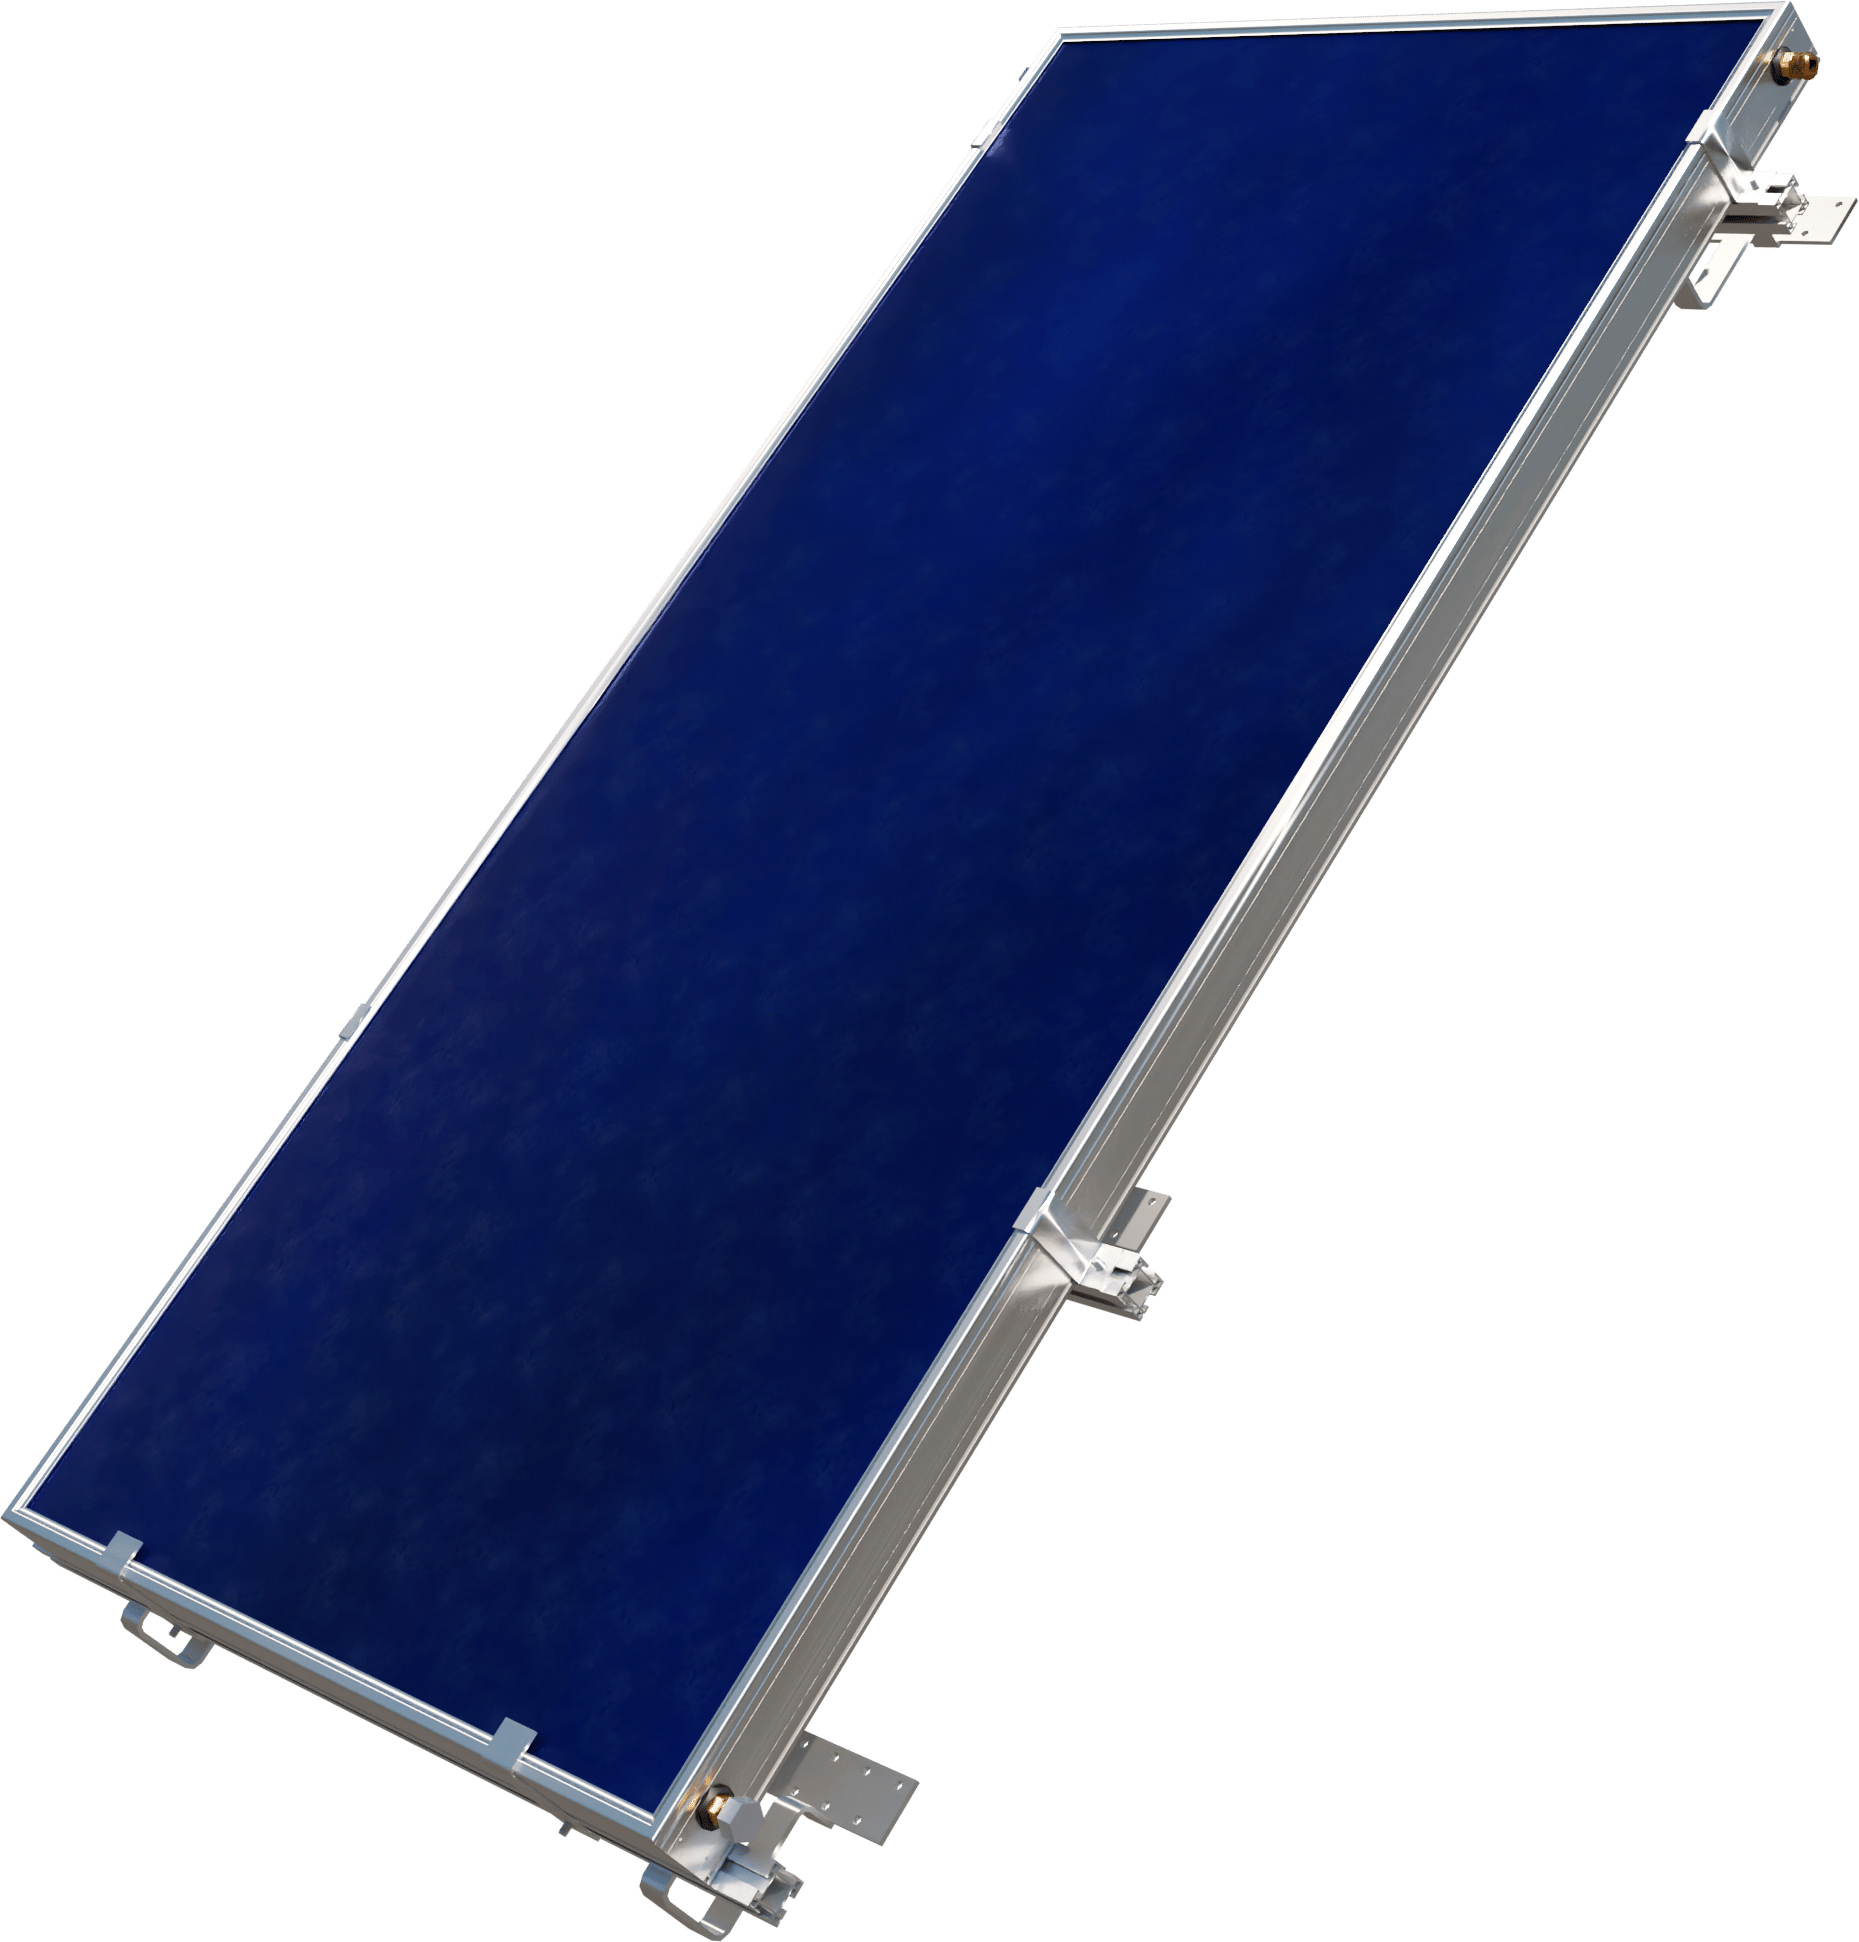 SunRain Solar Flat Plate Collector with Roof Mounting Stand - SRCC solar water heater